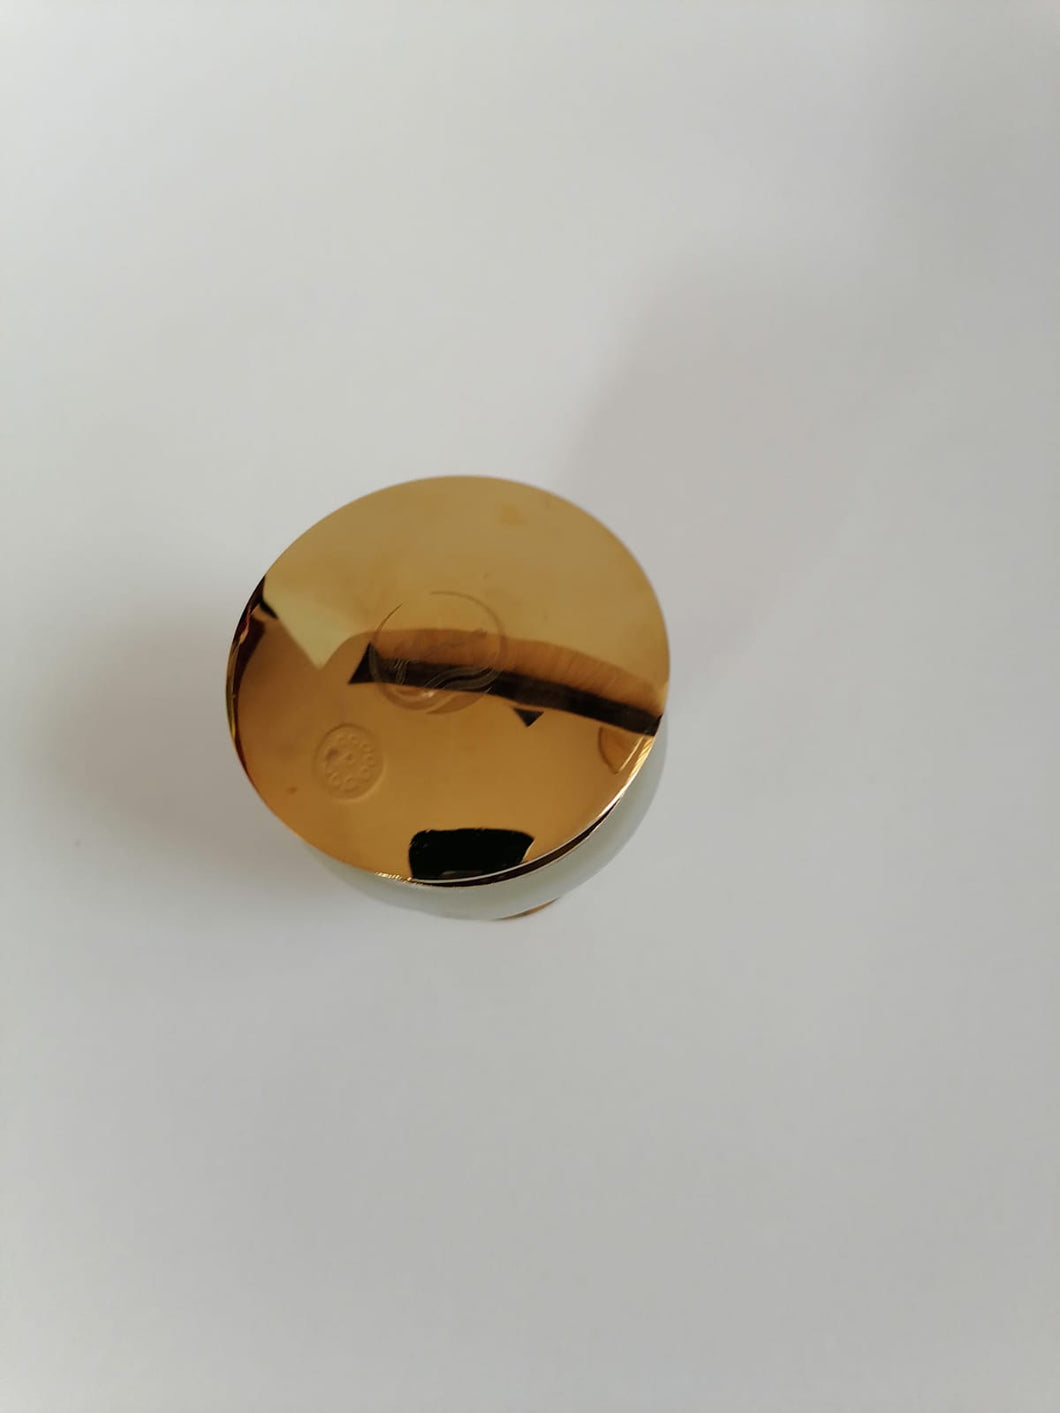 Unlacquered Solid brass sink drain , Solid Brass Drain, Pop Up Drain, Brass Push Up Drain